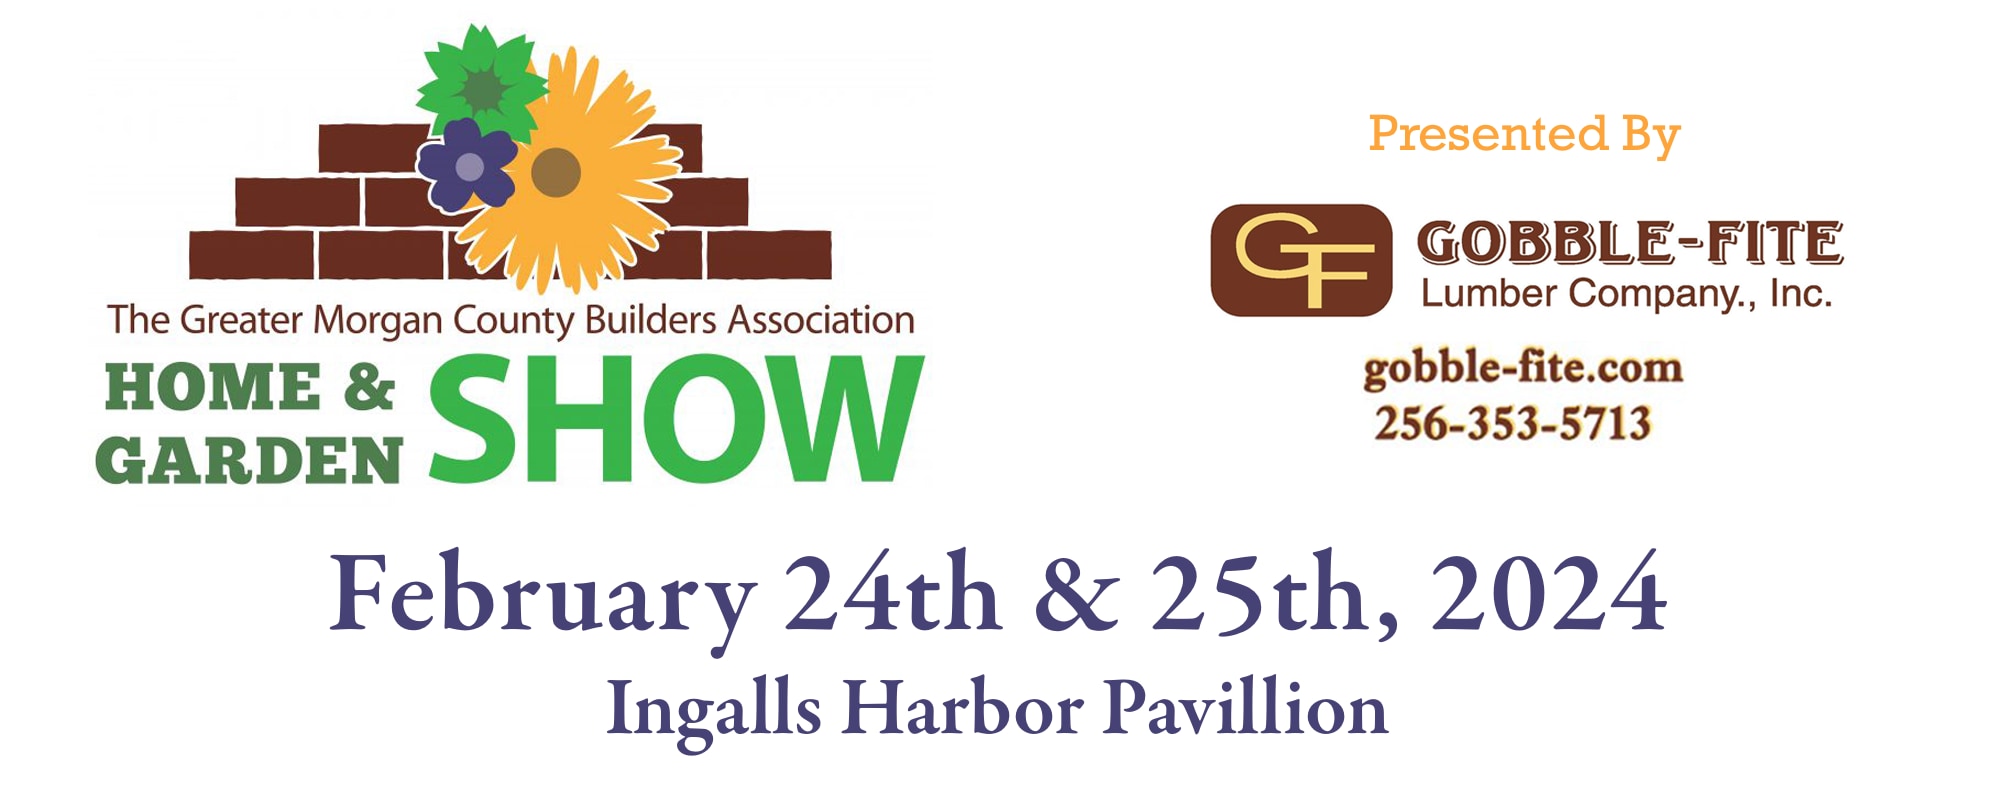 The 2024 Greater Morgan County Builders Association Home and Garden Show in Decatur Alabama